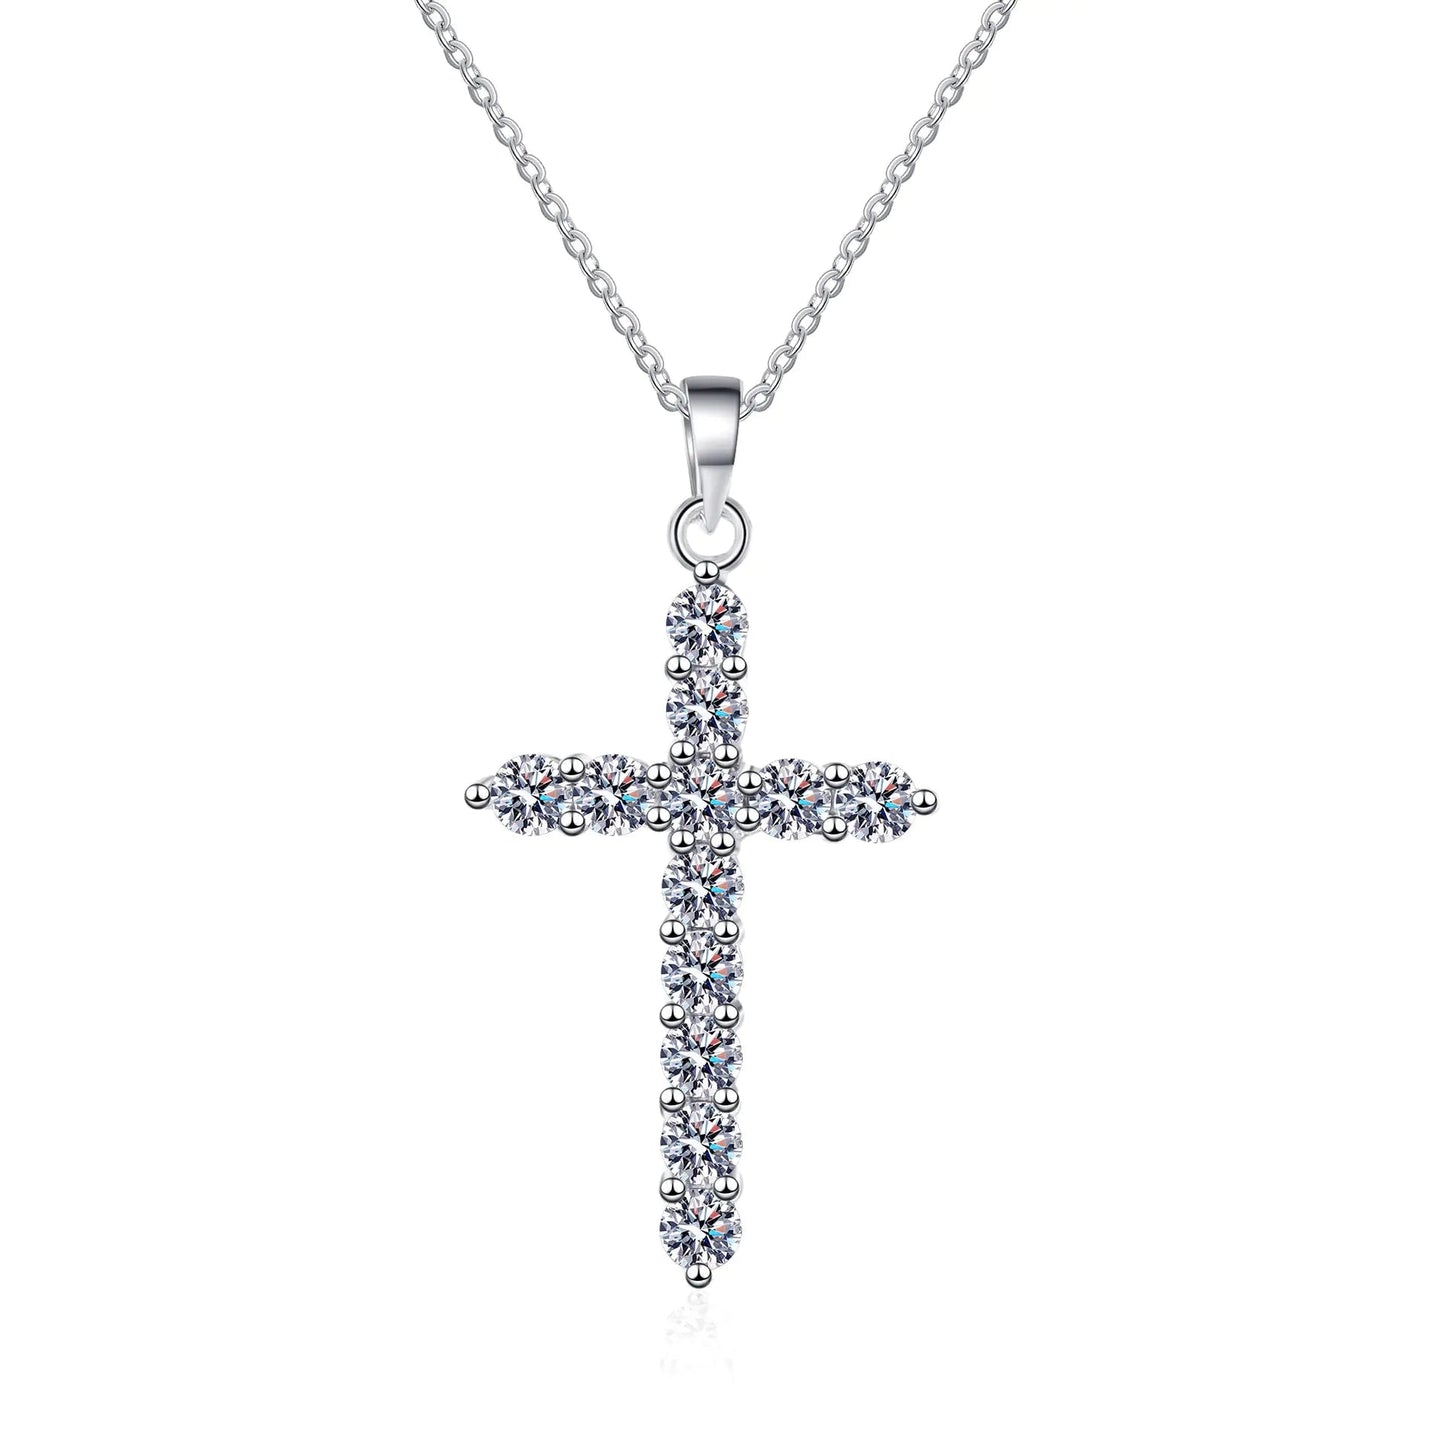 Moissanite Diamond Necklace - Allure SocietyNecklaces